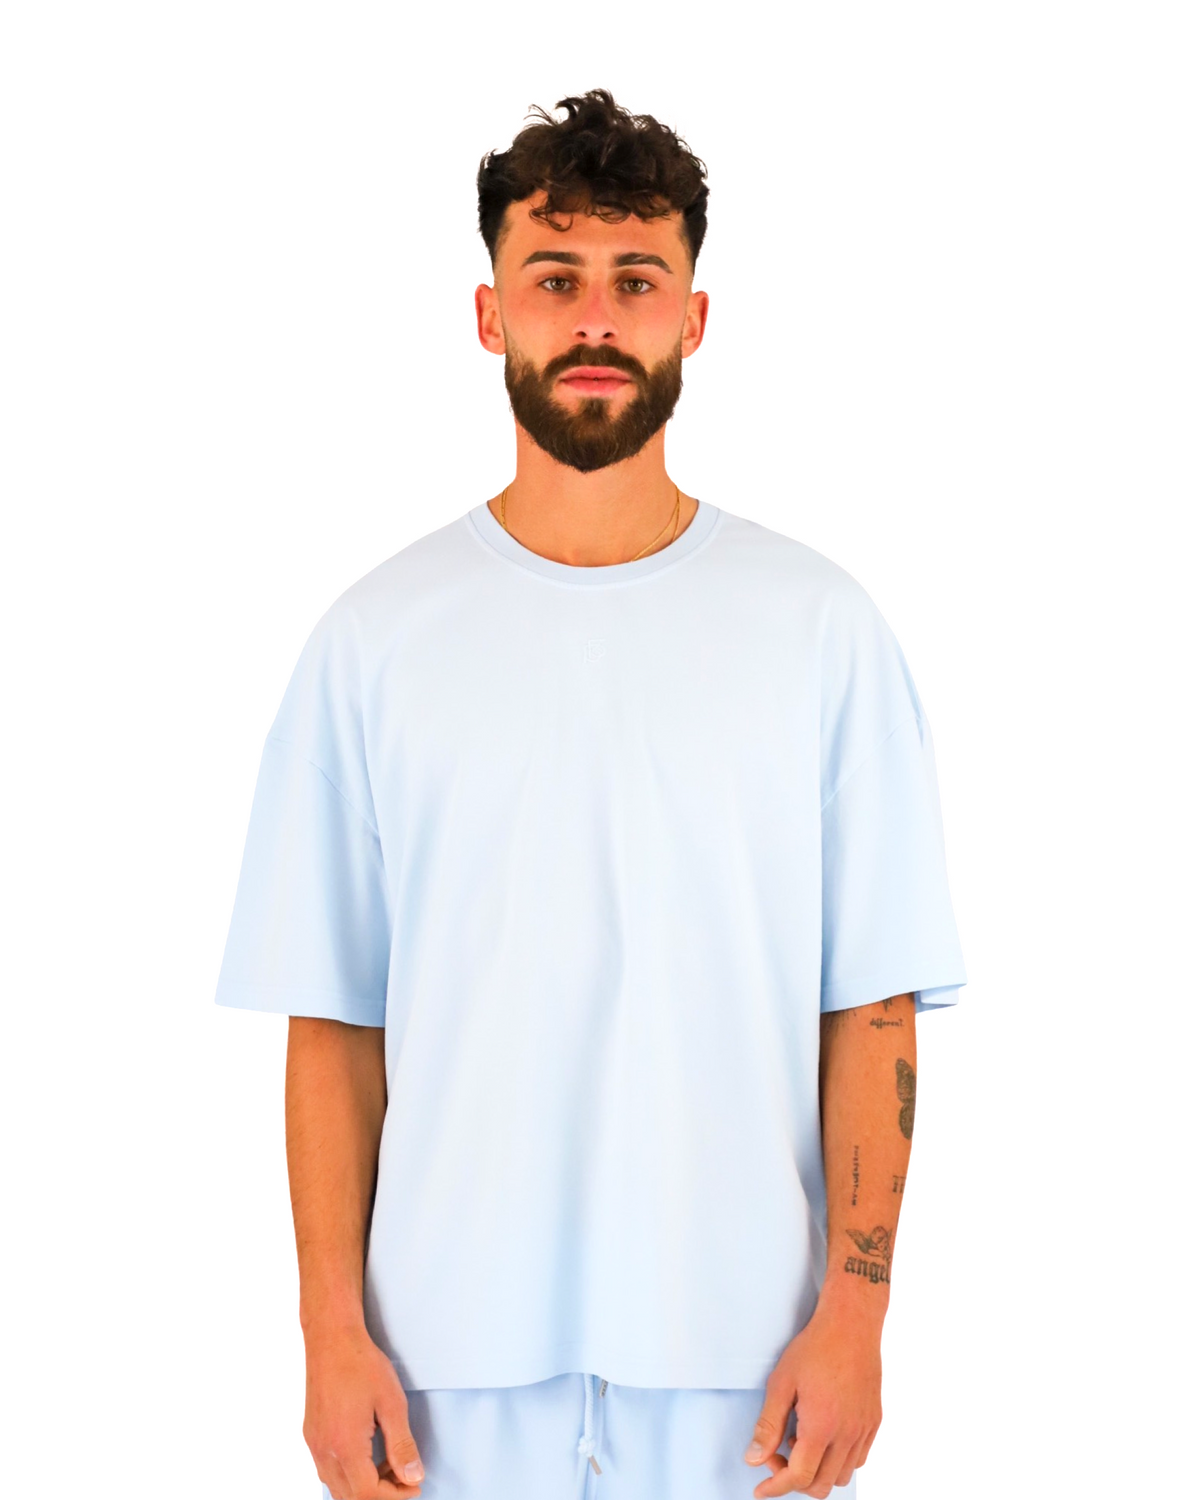 ALL-TIMES T-SHIRT WASHED-OUT XENON BLUE